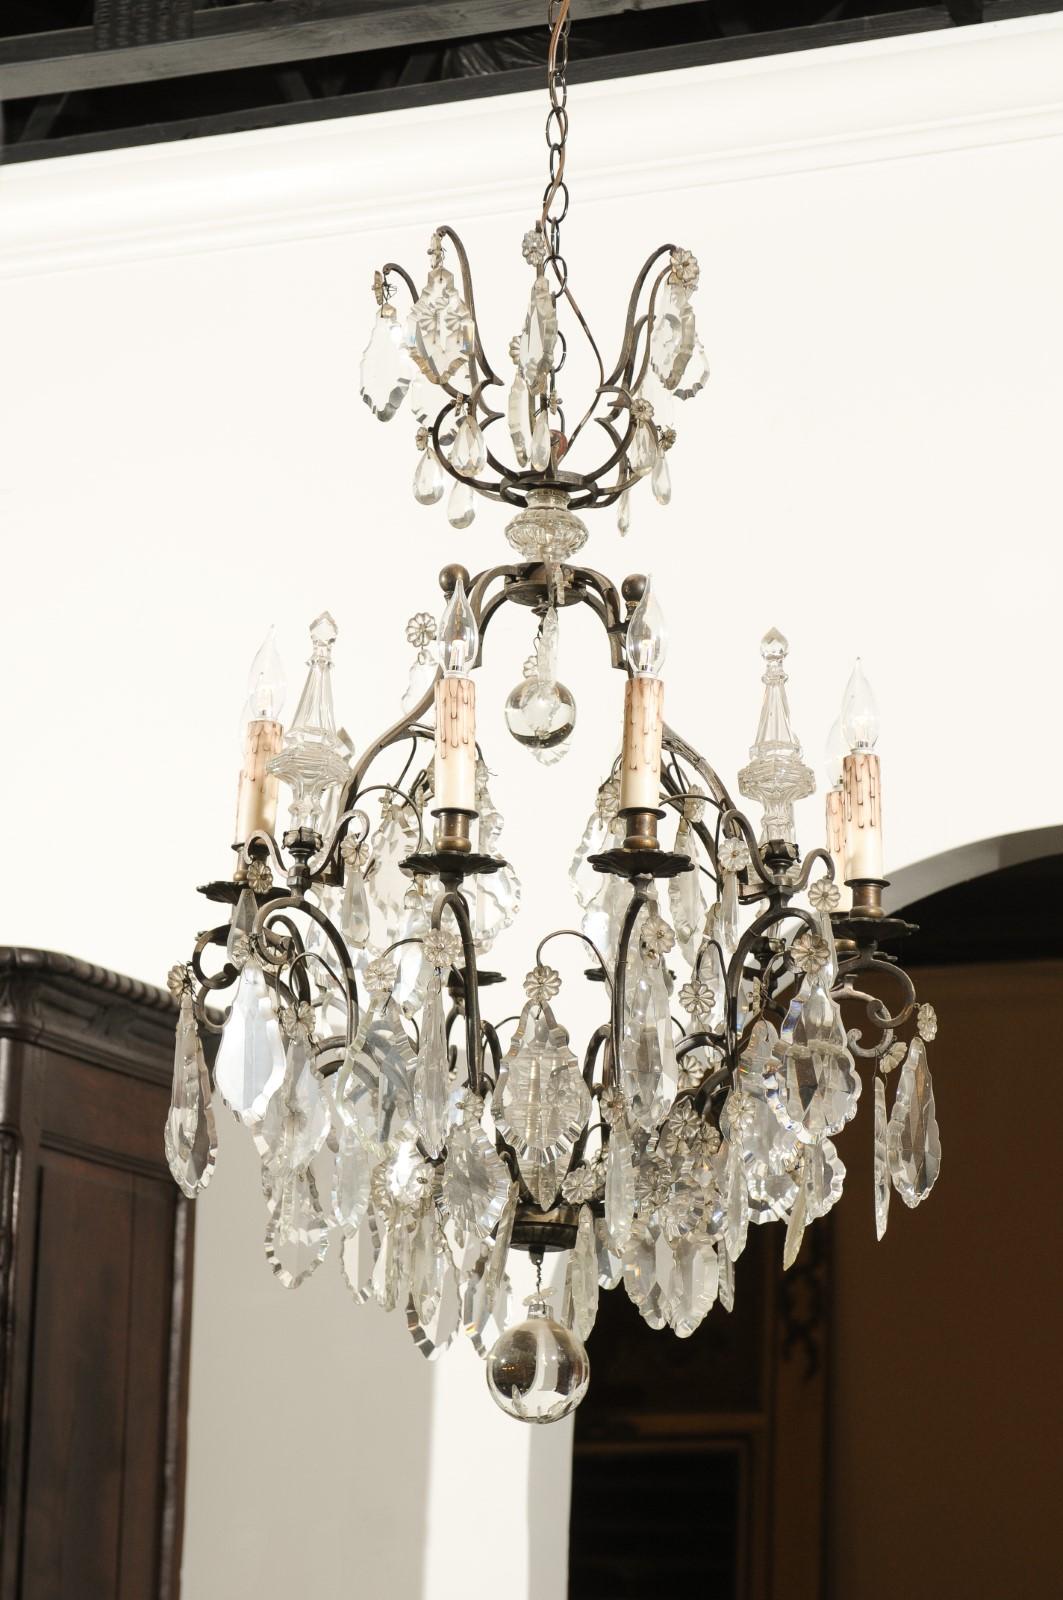 A French eight-light crystal chandelier from the late 19th century, with bronze armature and crystal obelisks. Born in France during the last decade of the 19th century, this exquisite eight-light chandelier features a bronze armature accented with